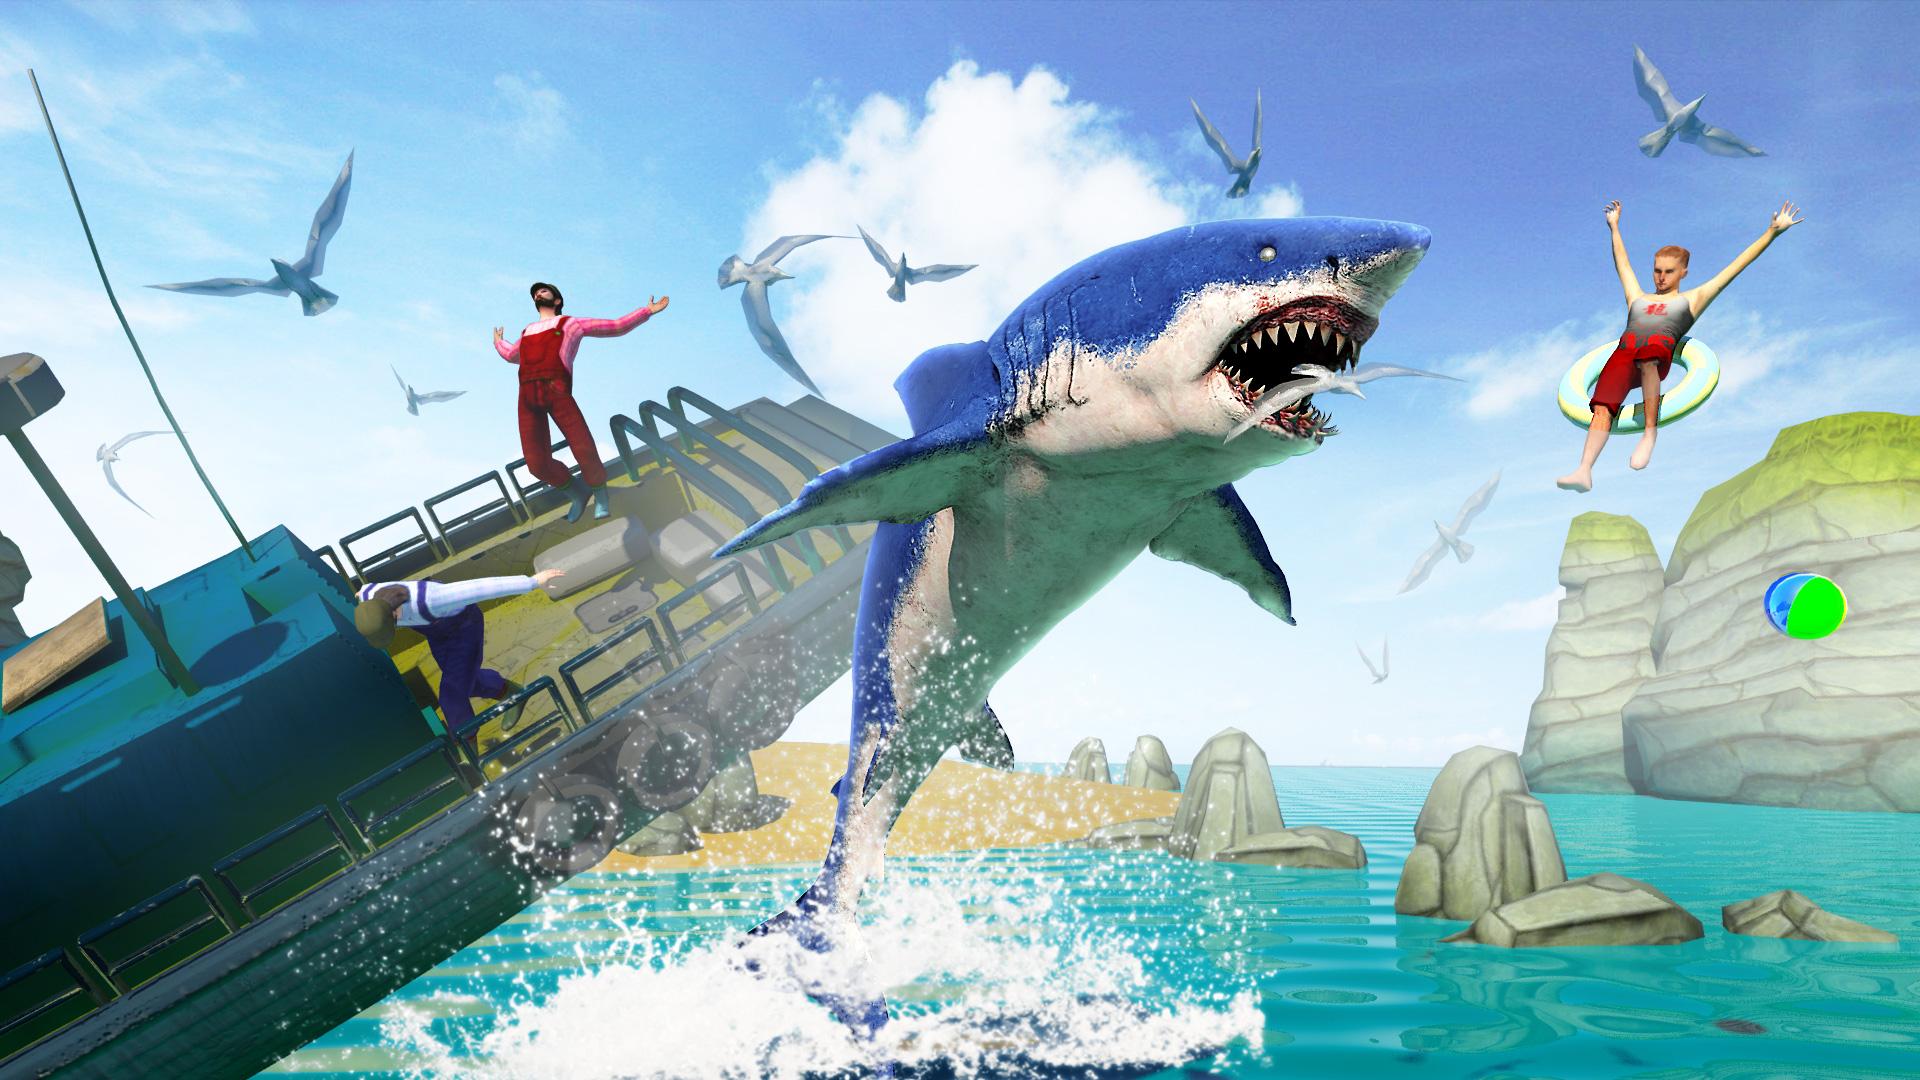 Hungry Shark Attack Simulator New Hunting Game For Android Apk Download - jelly playing roblox shark attack with jelly